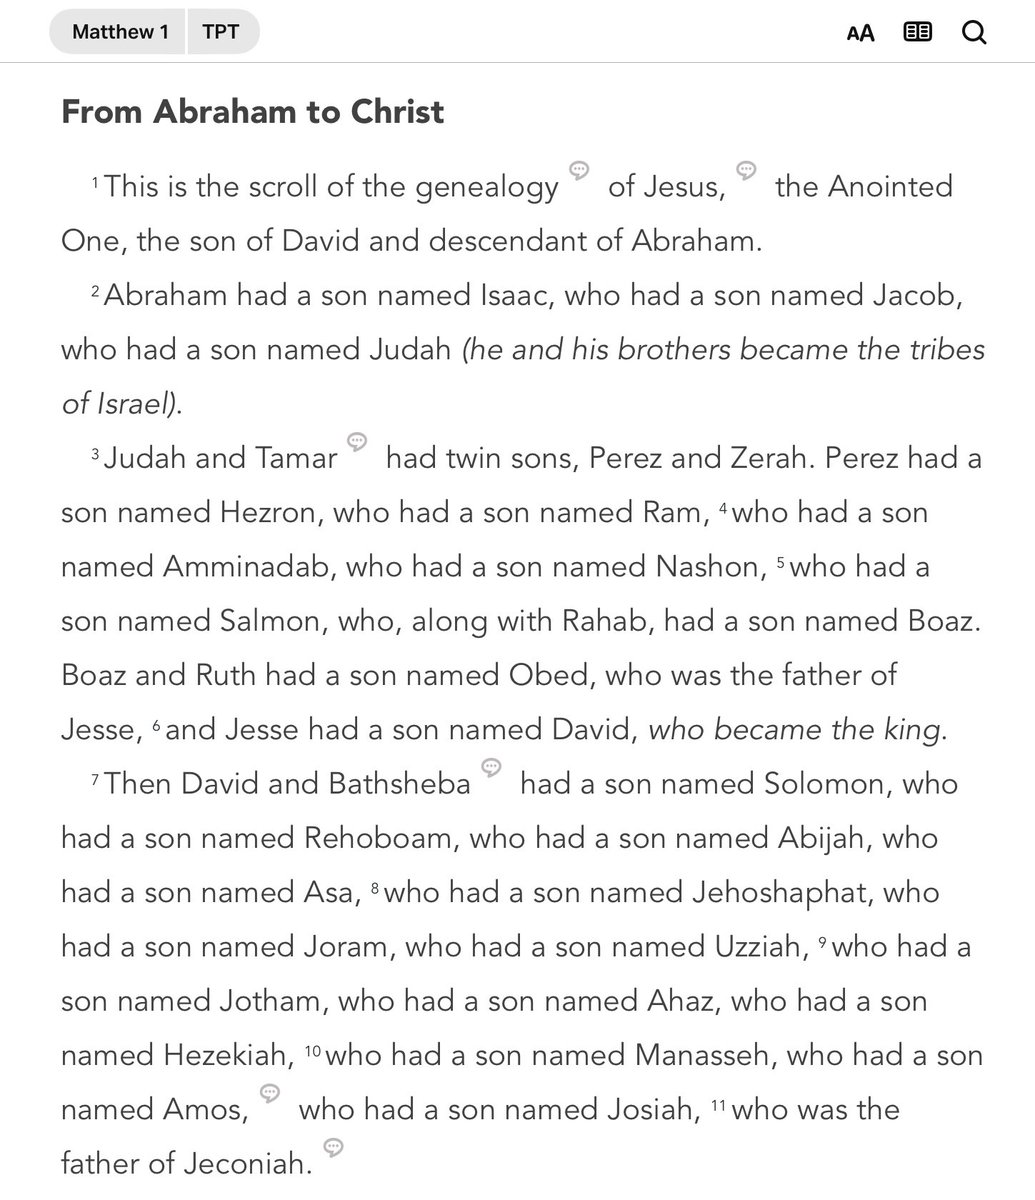 Palestine doesn't exist in the Bible. Jesus is a Jew from Judea. He was born a Jew, raised as a Jew, and lived as a Jew. He was a rabbi. When he returns, he will set up his kingdom in Jerusalem. Jesus genealogy is laid out in the first chapter in Matthew.